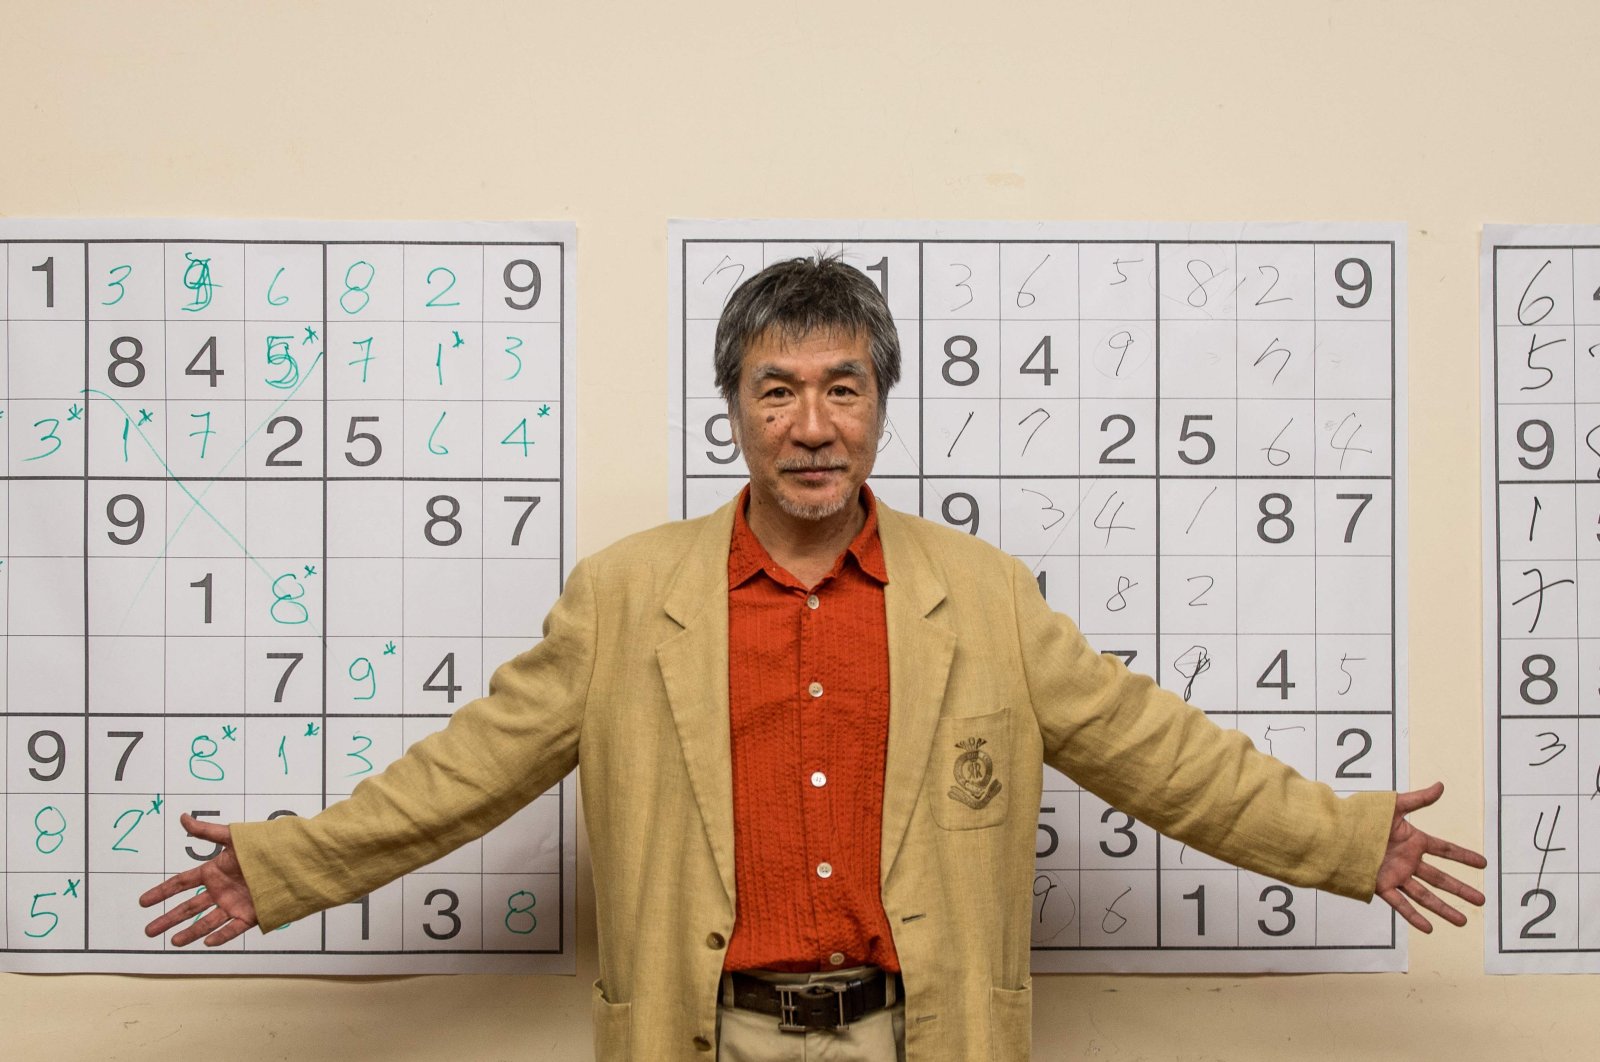 Japanese puzzle manufacturer Maki Kaji poses for a picture during the first Sudoku national competition in Sao Paulo, Brazil, Sept. 29, 2012. (AFP Photo)